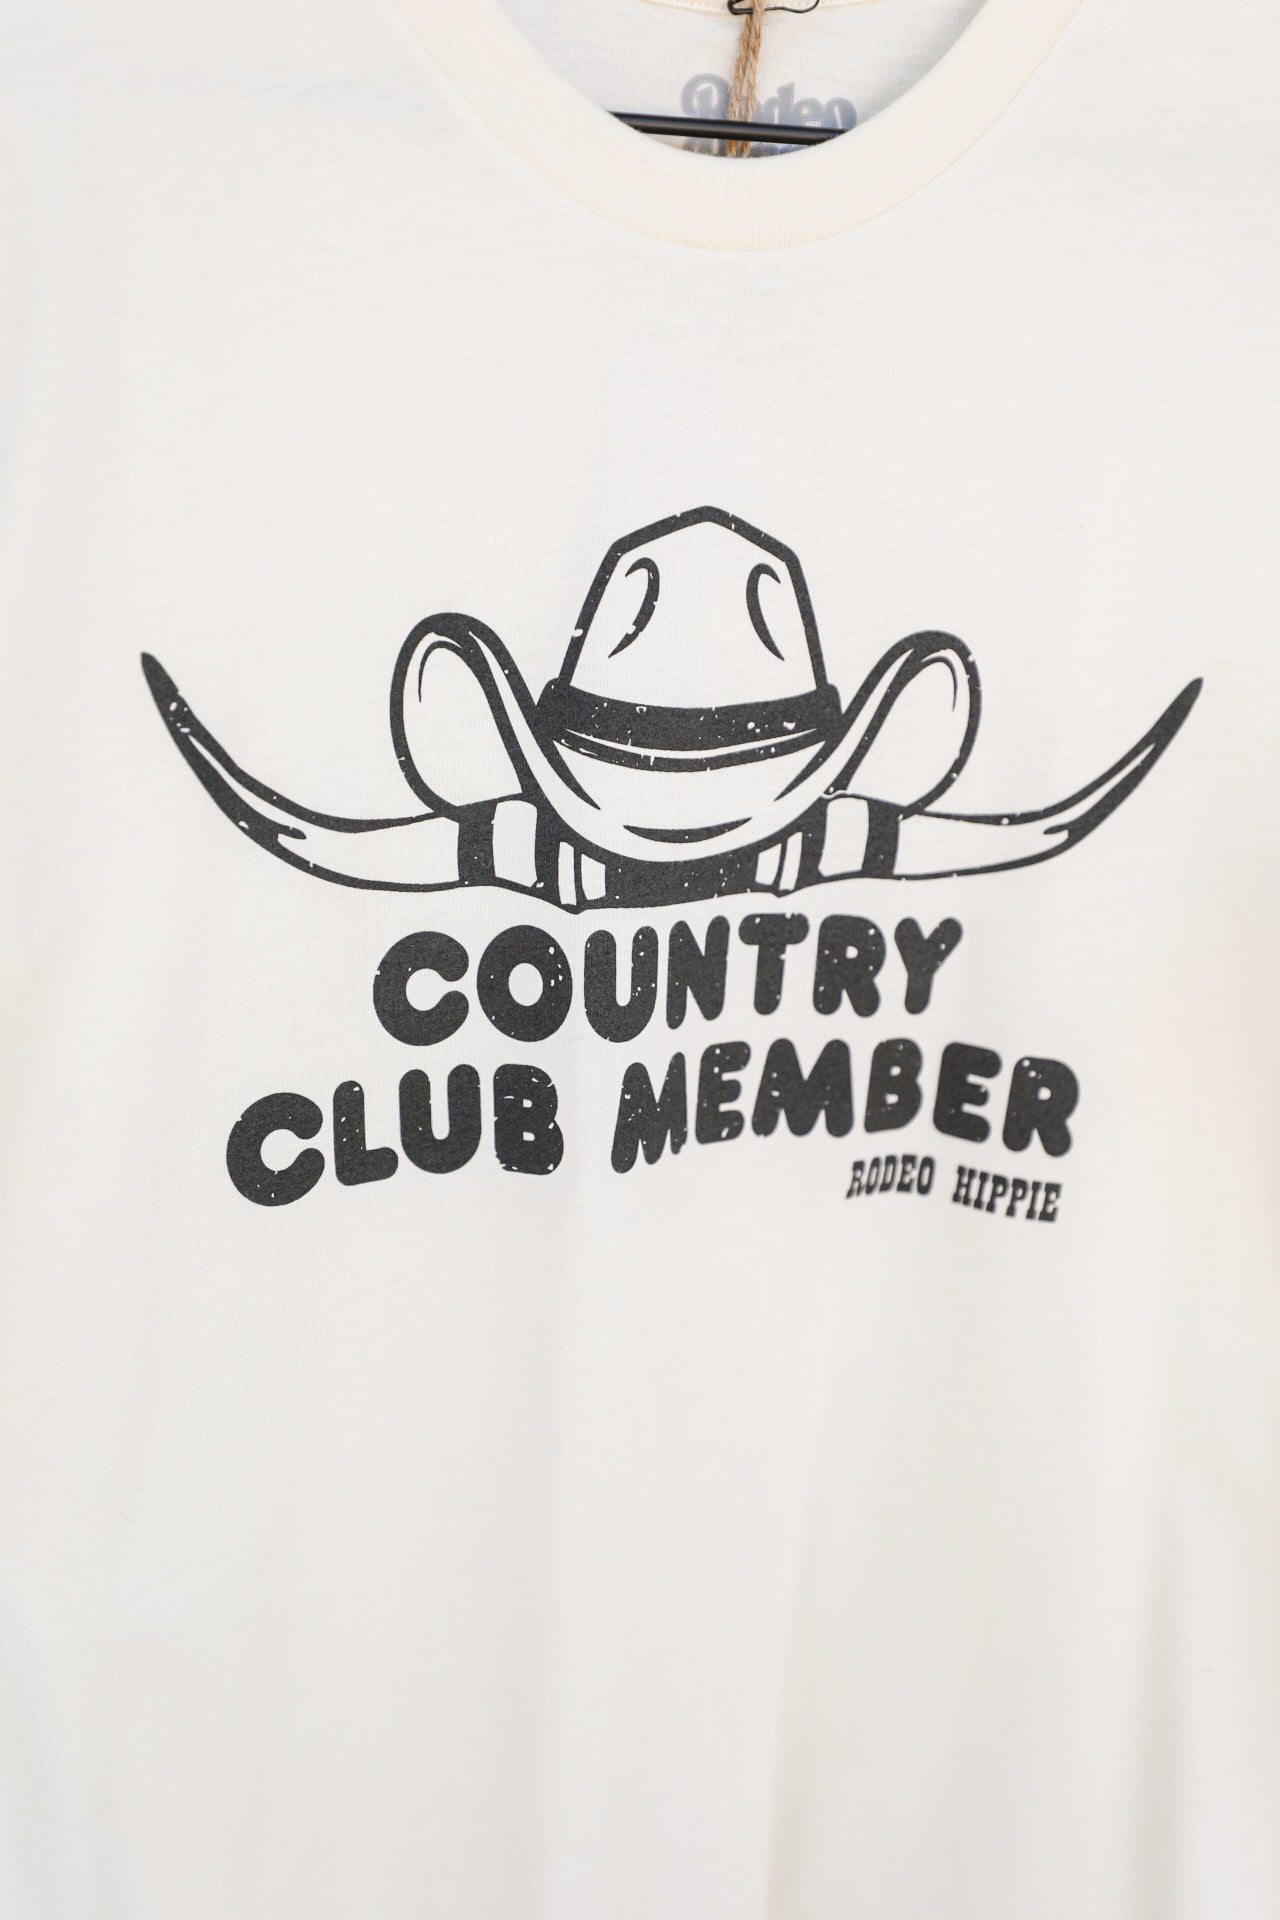 Country Club Tee-Graphic Tee-Crooked Horn Company, Online Women's Fashion Boutique in San Tan Valley, Arizona 85140